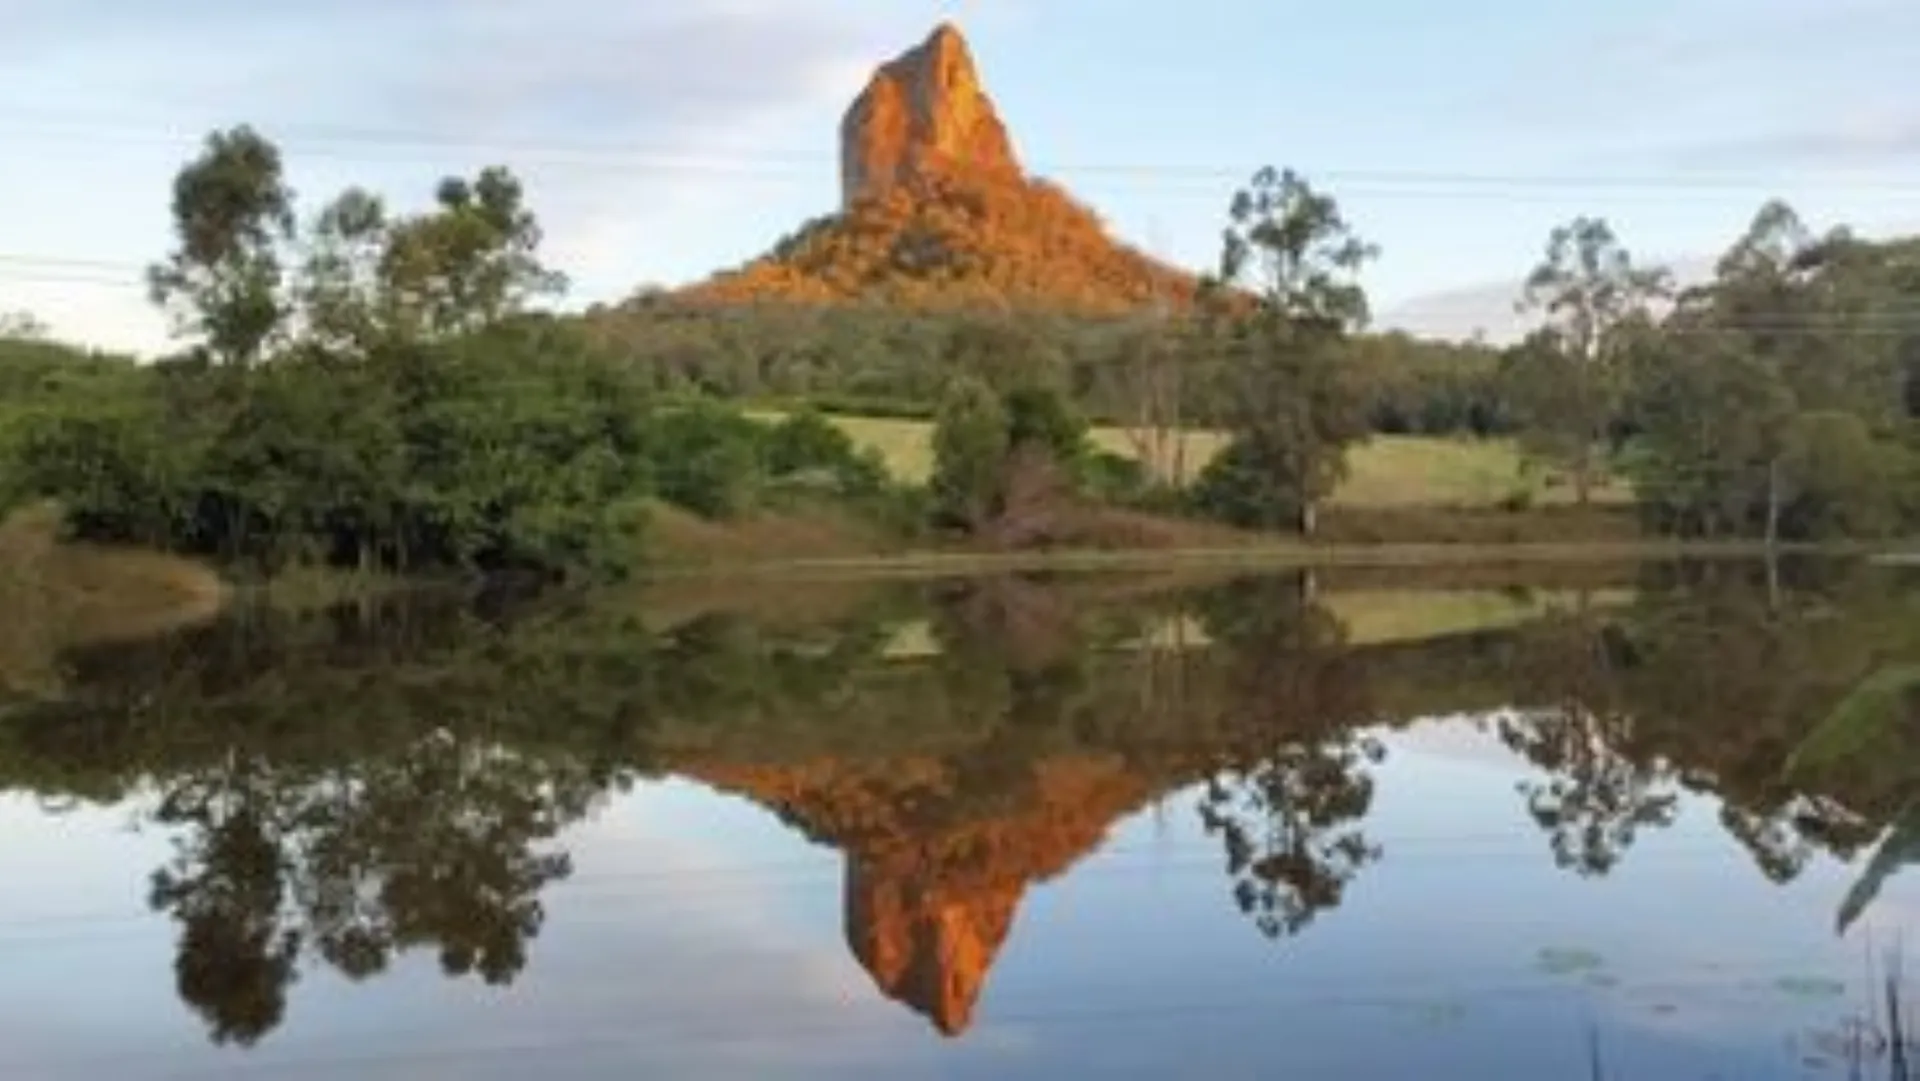 Image shows Mt Coonowrin with late afternoon sun shining, and reflected in a lake in the foreground